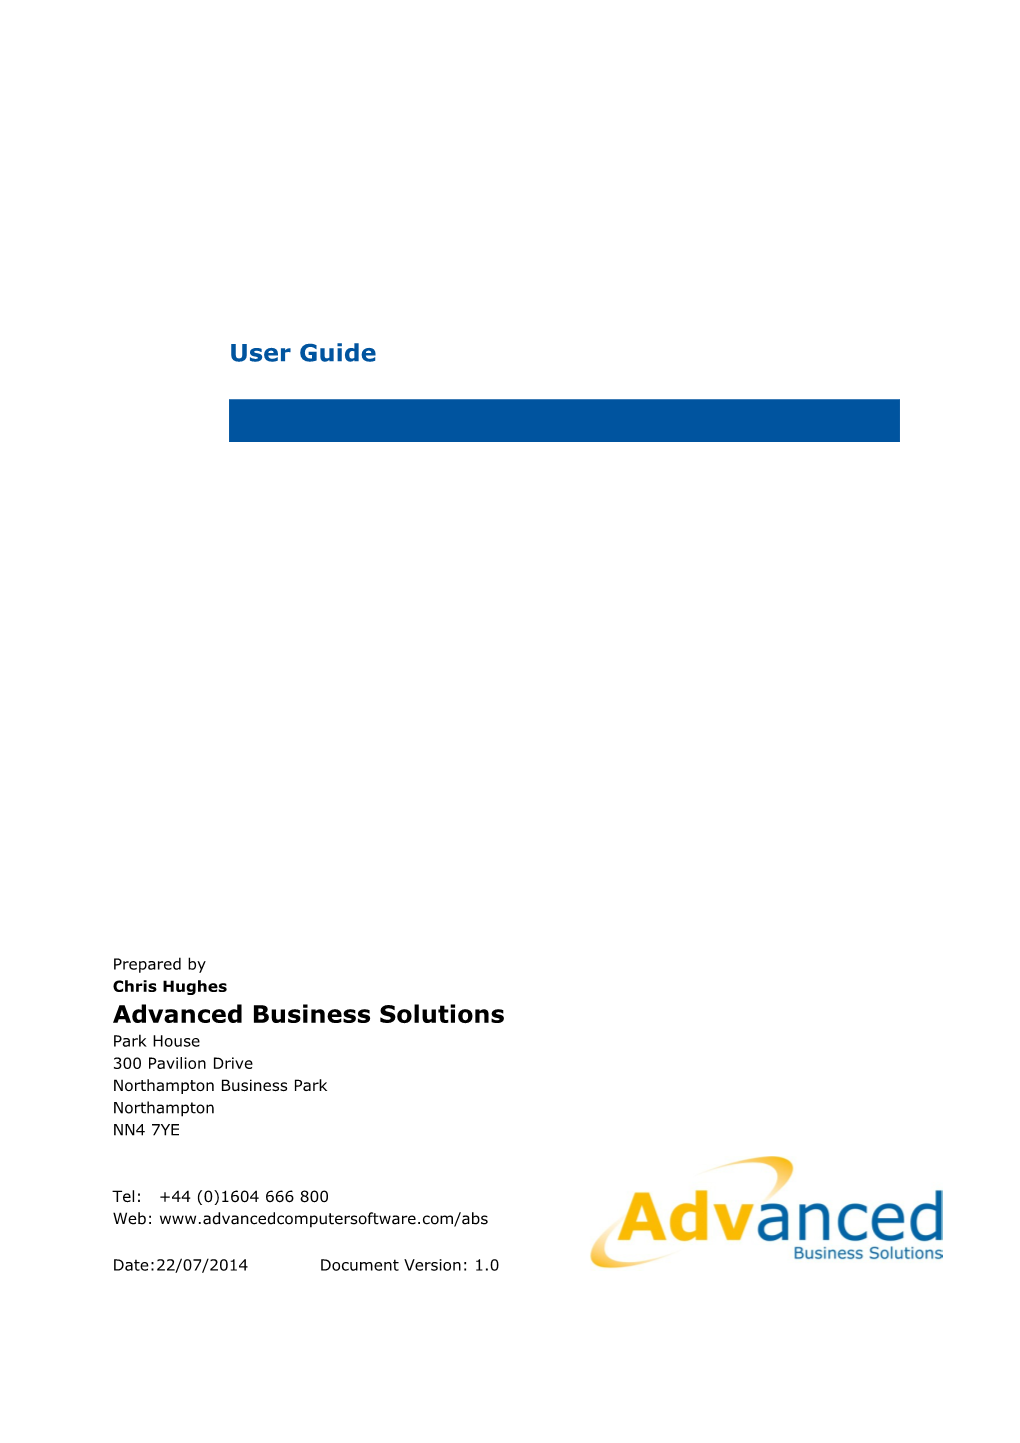 Copyright Advanced Business Software and Solutions Ltd. 2014